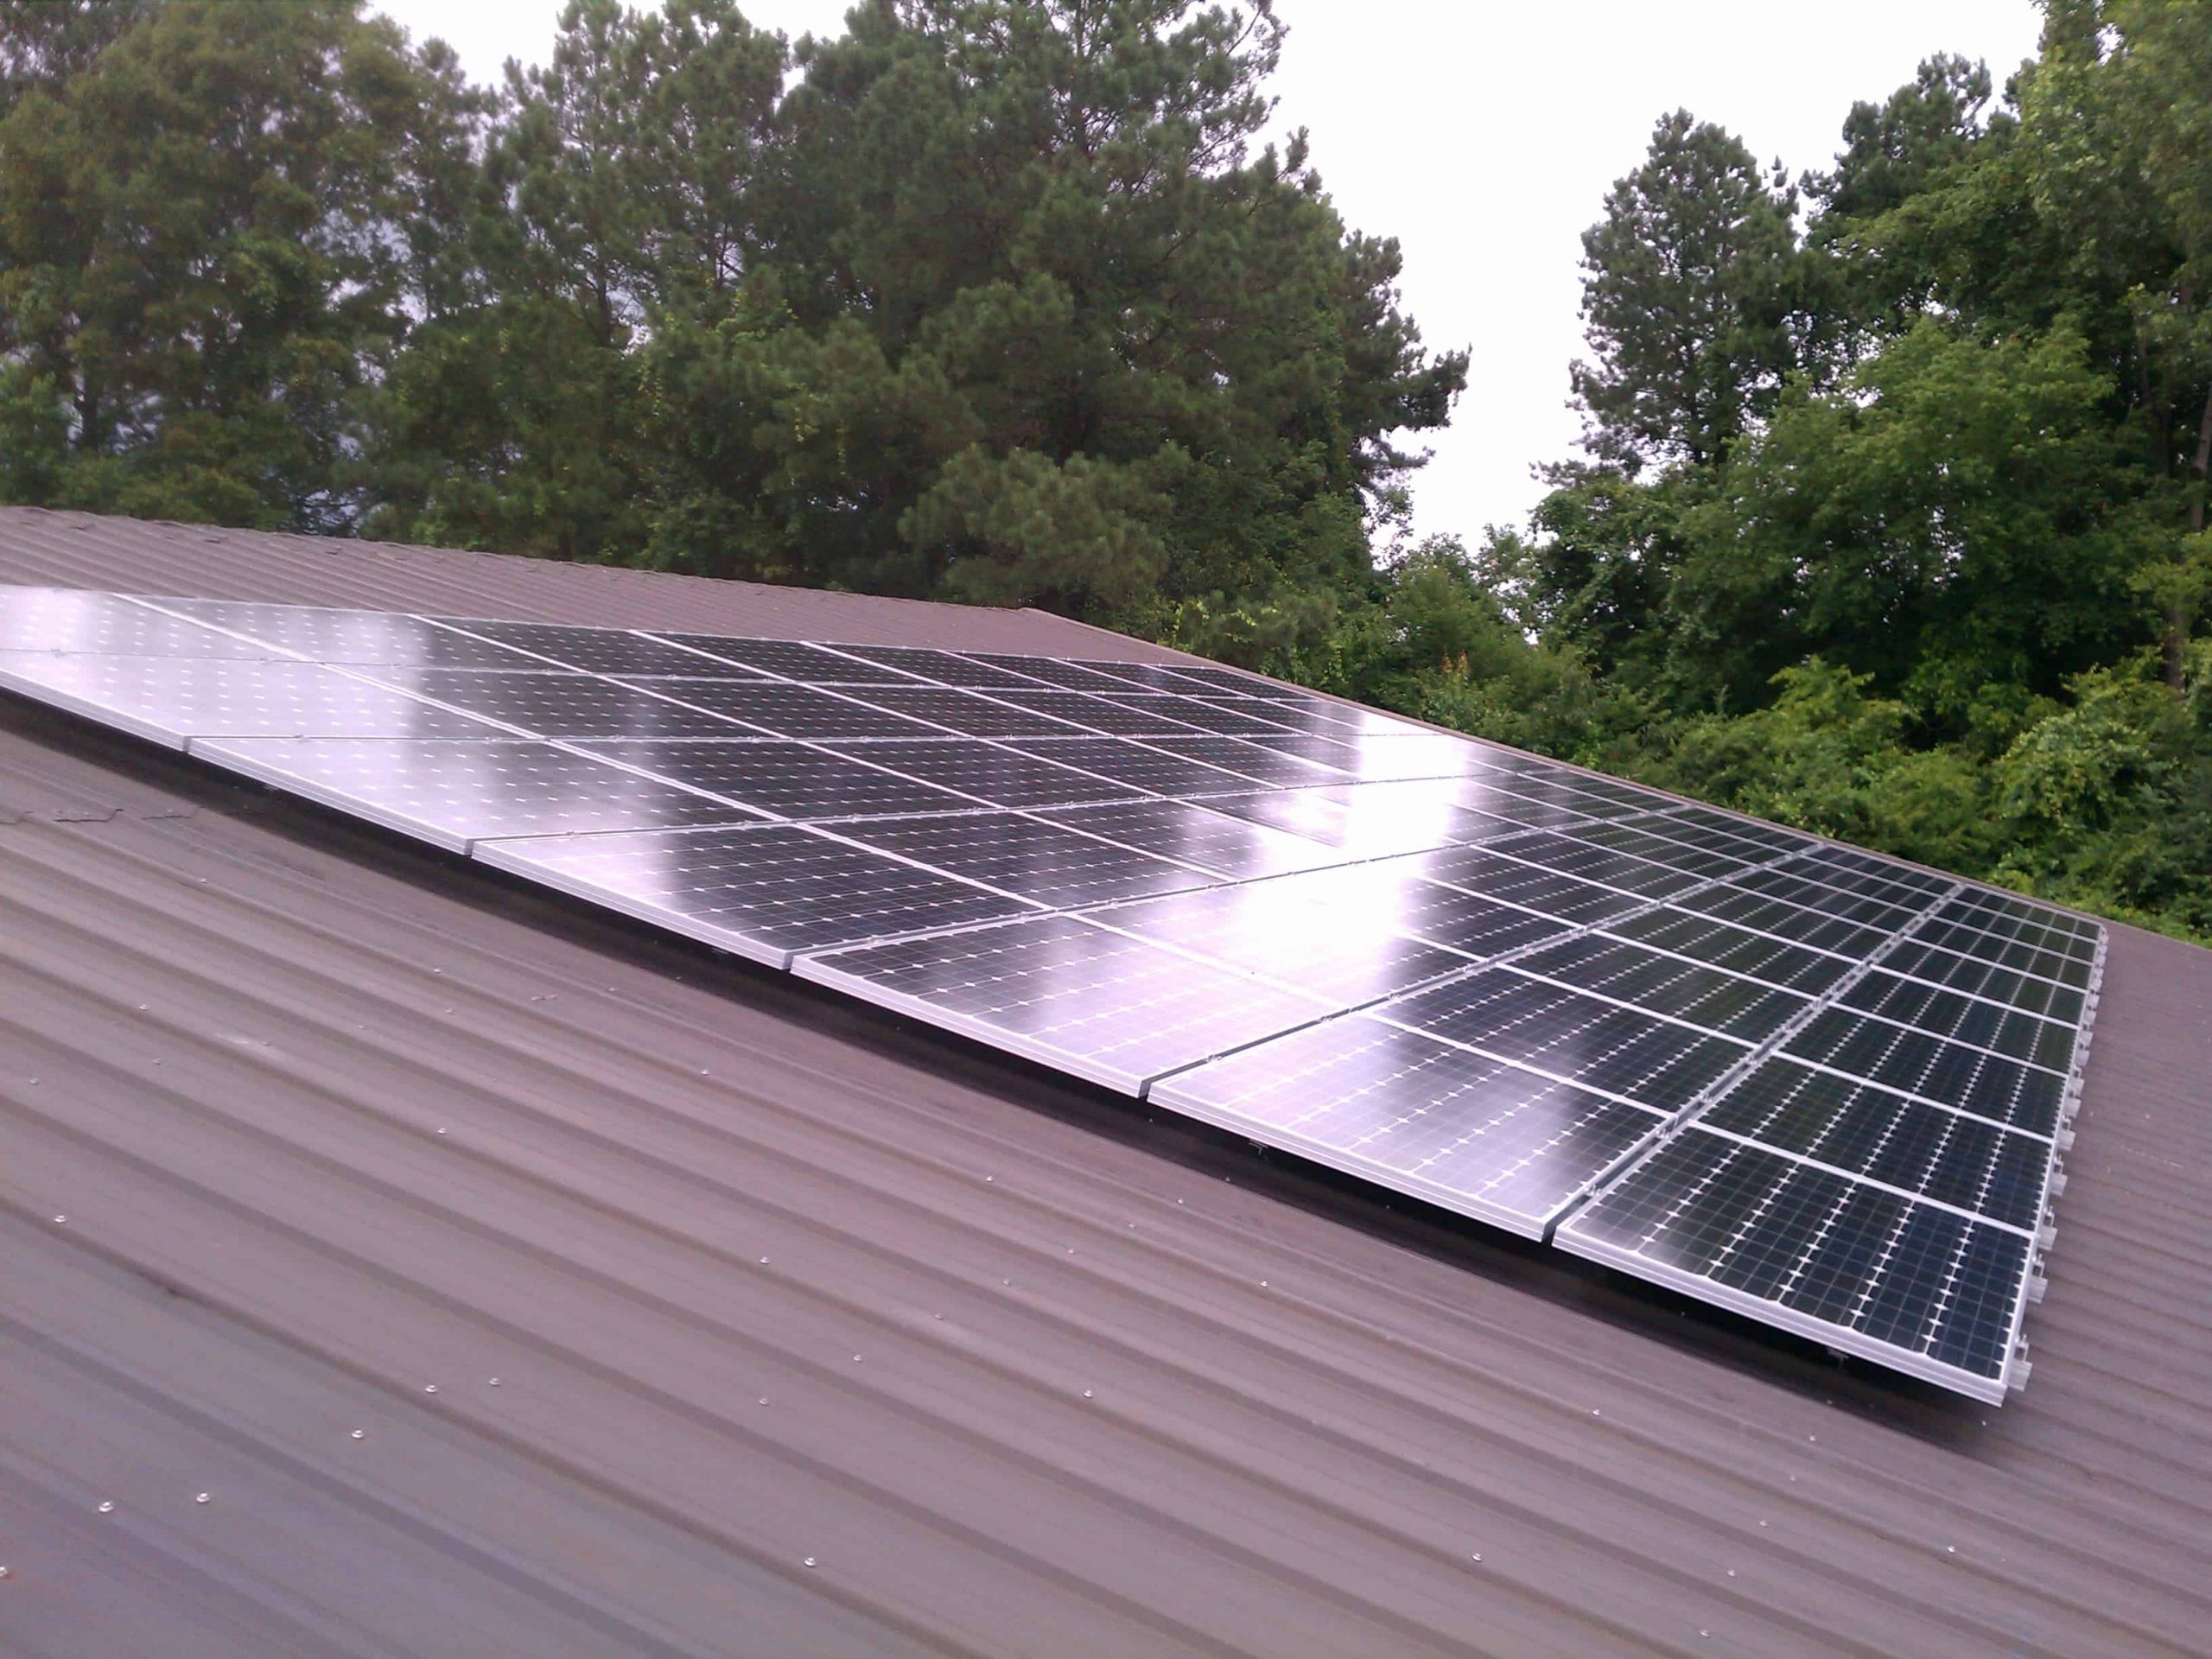 Do Solar Panels Need to be Cleaned?